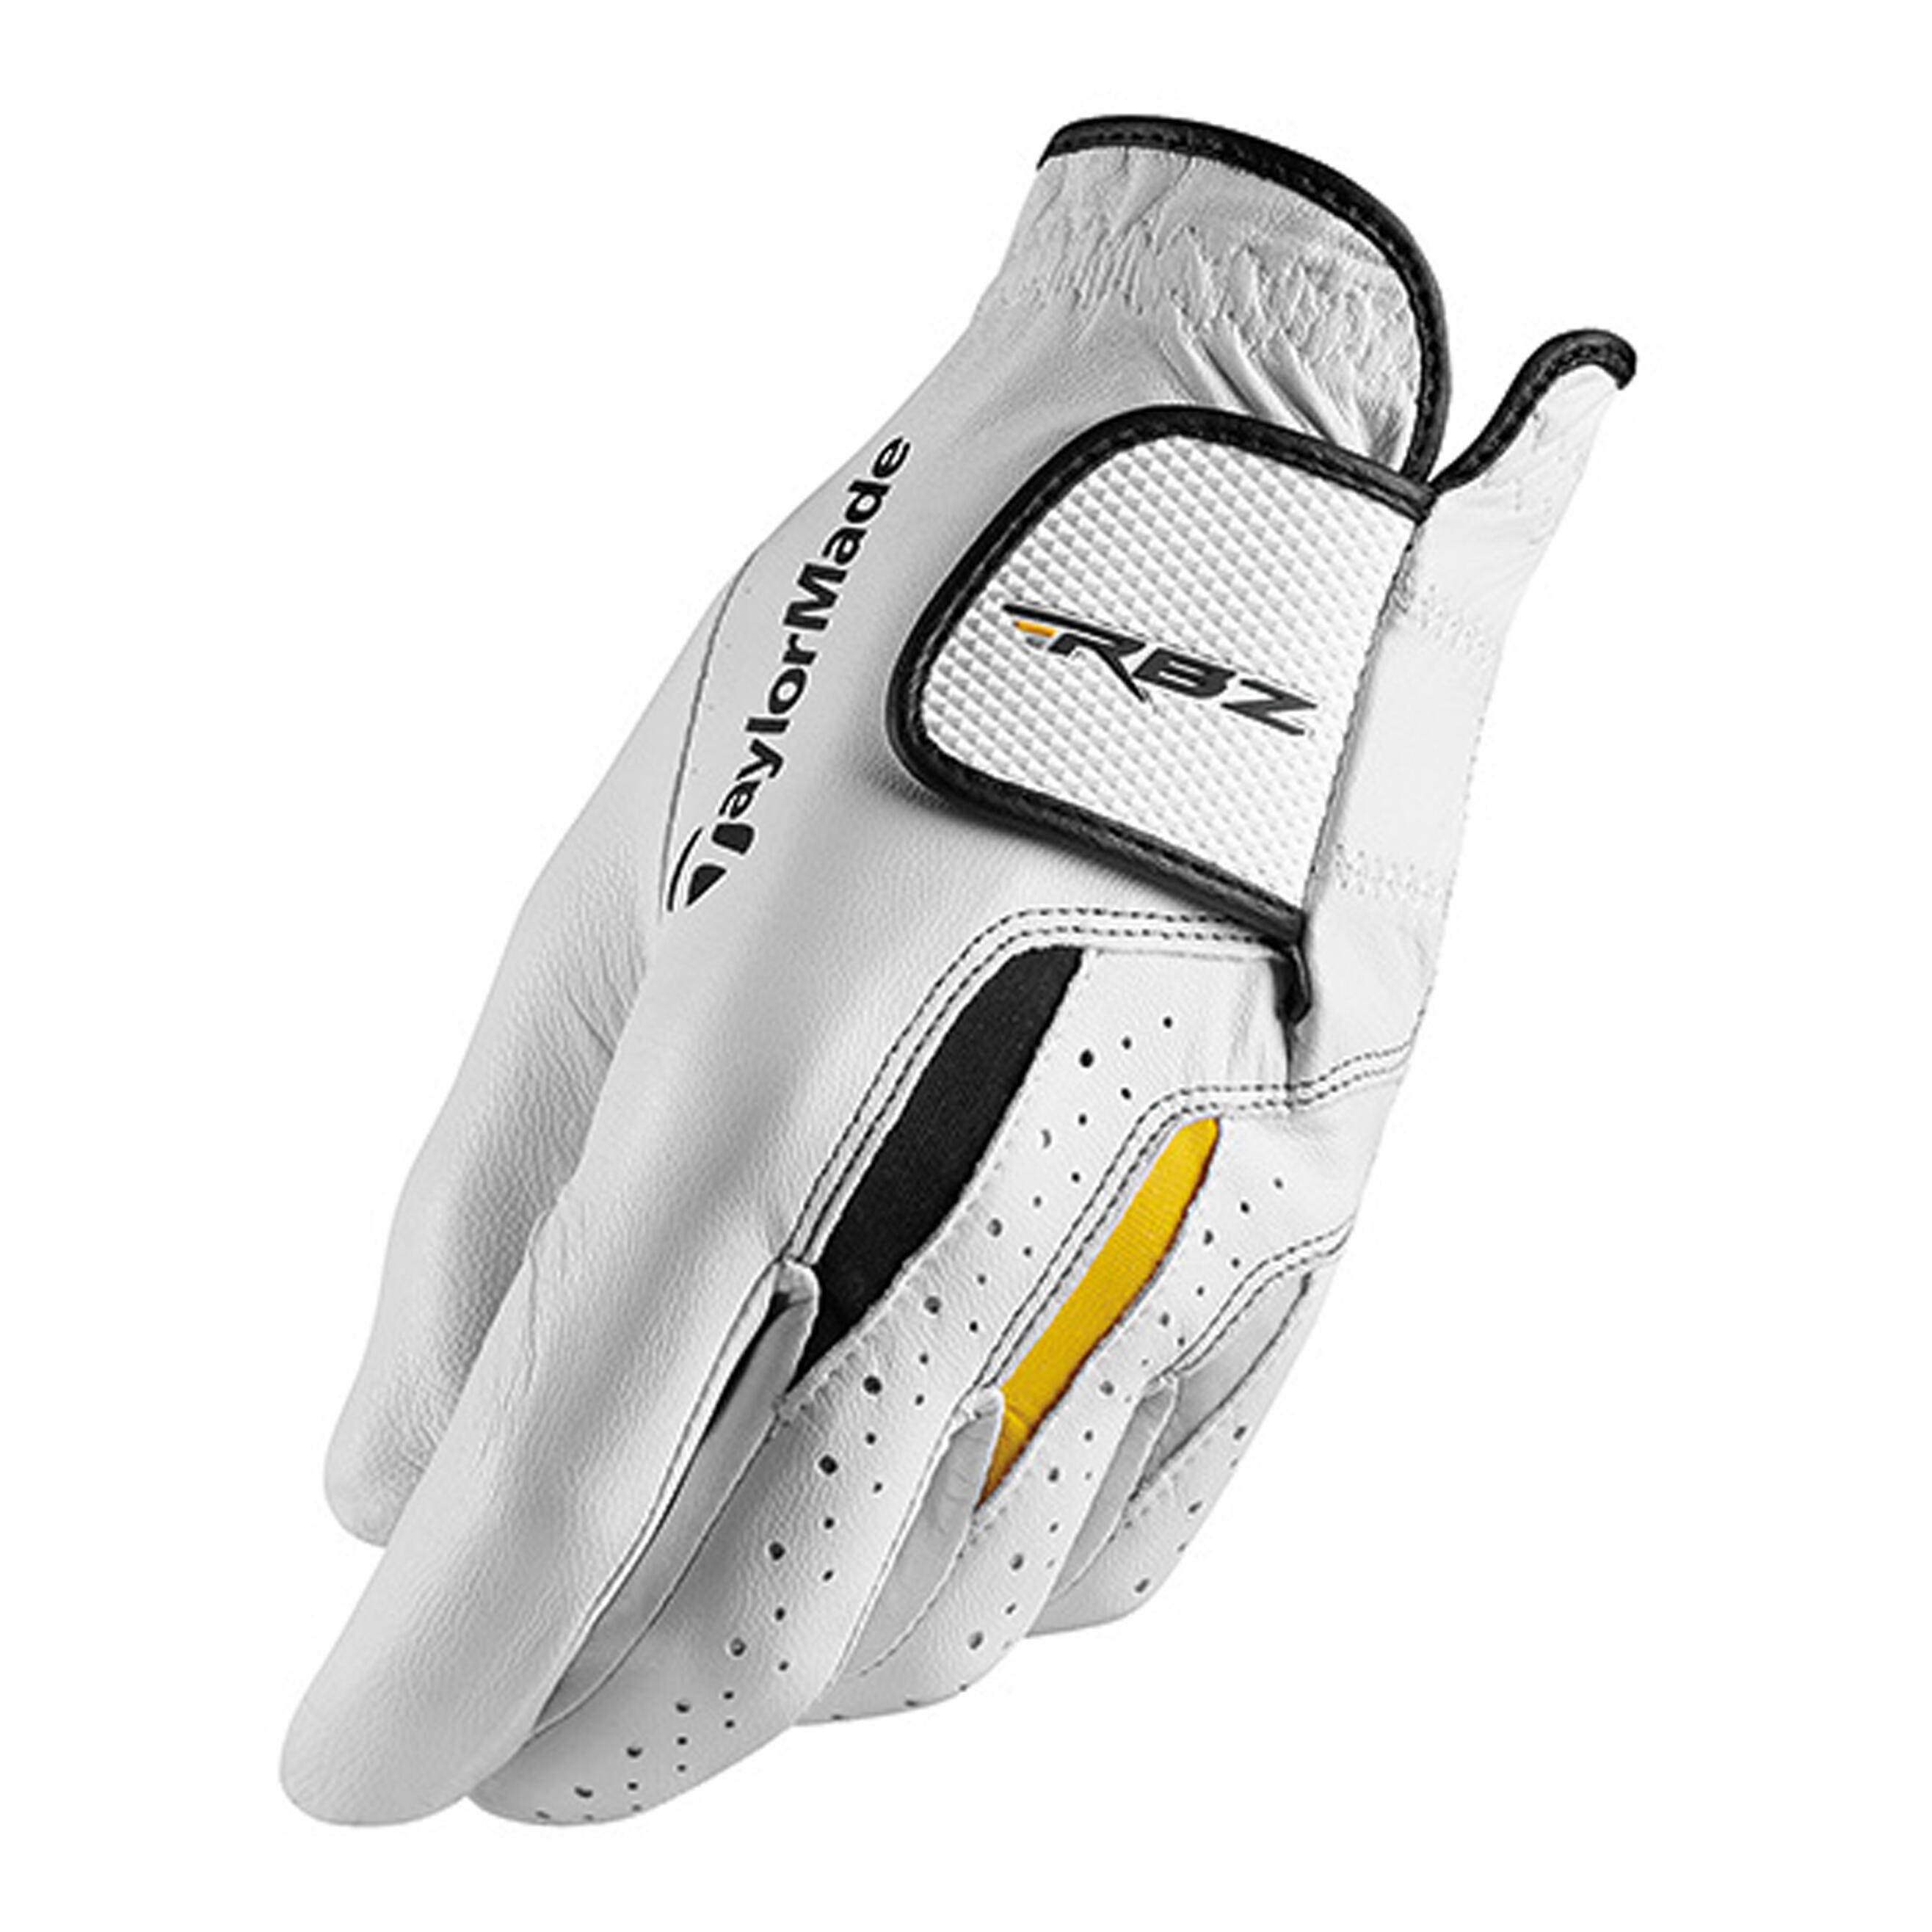 TAYLORMADE Men's golf right-handed RBZ glove white